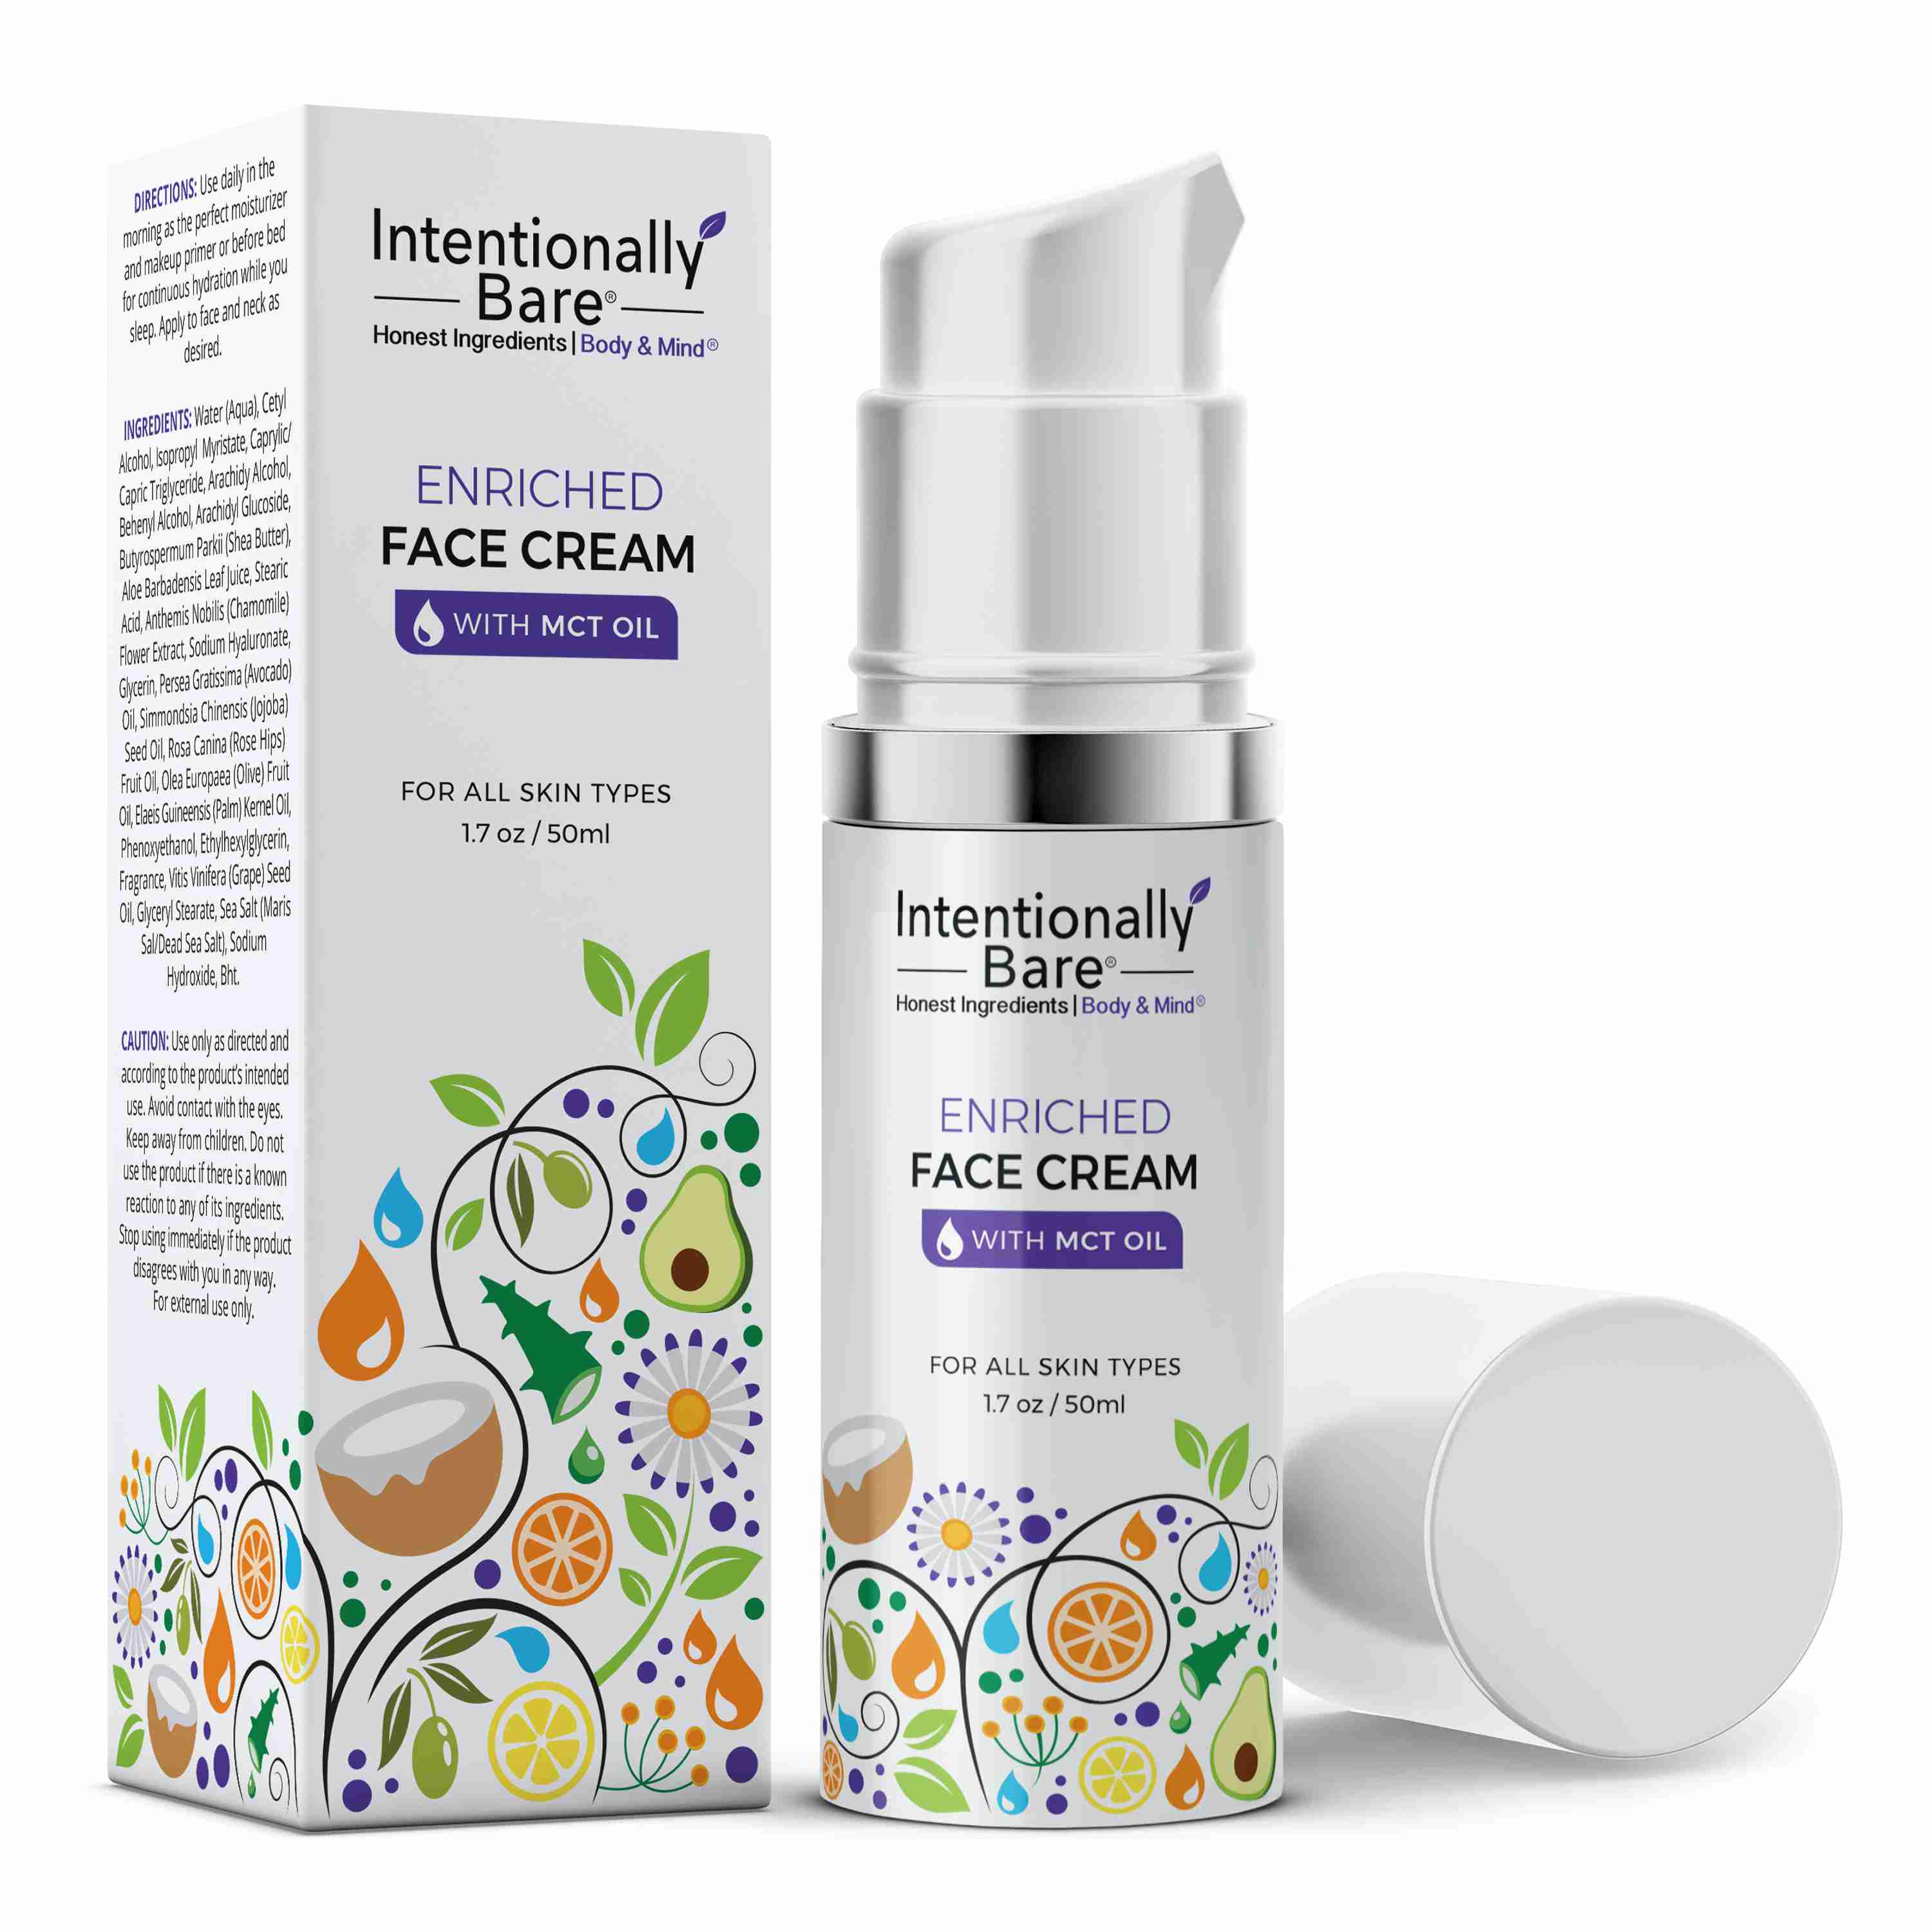 intentionally-bare-face-cream with cash back rebate